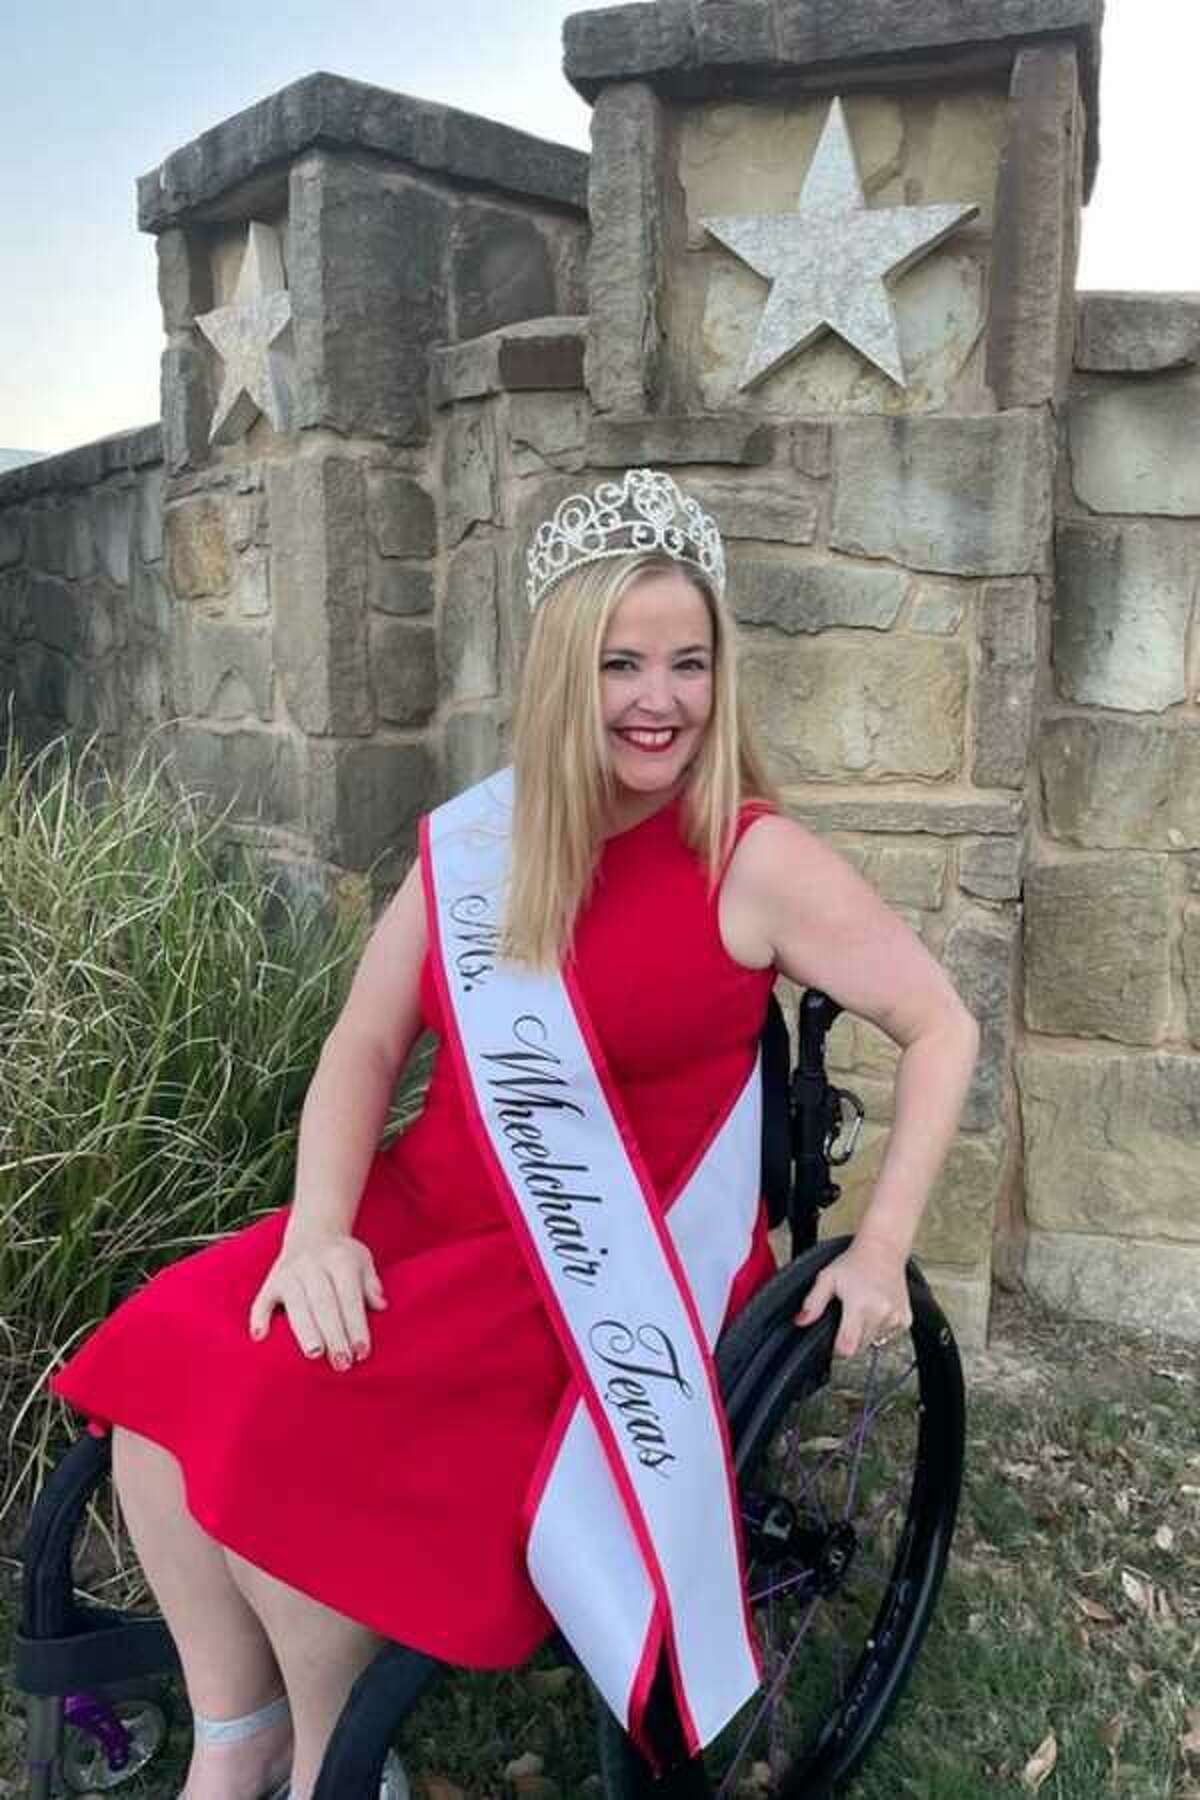 San Antonian Kristy Durso is the current Ms. Wheelchair Texas. She will compete for the national title of Ms. Wheelchair America in August.